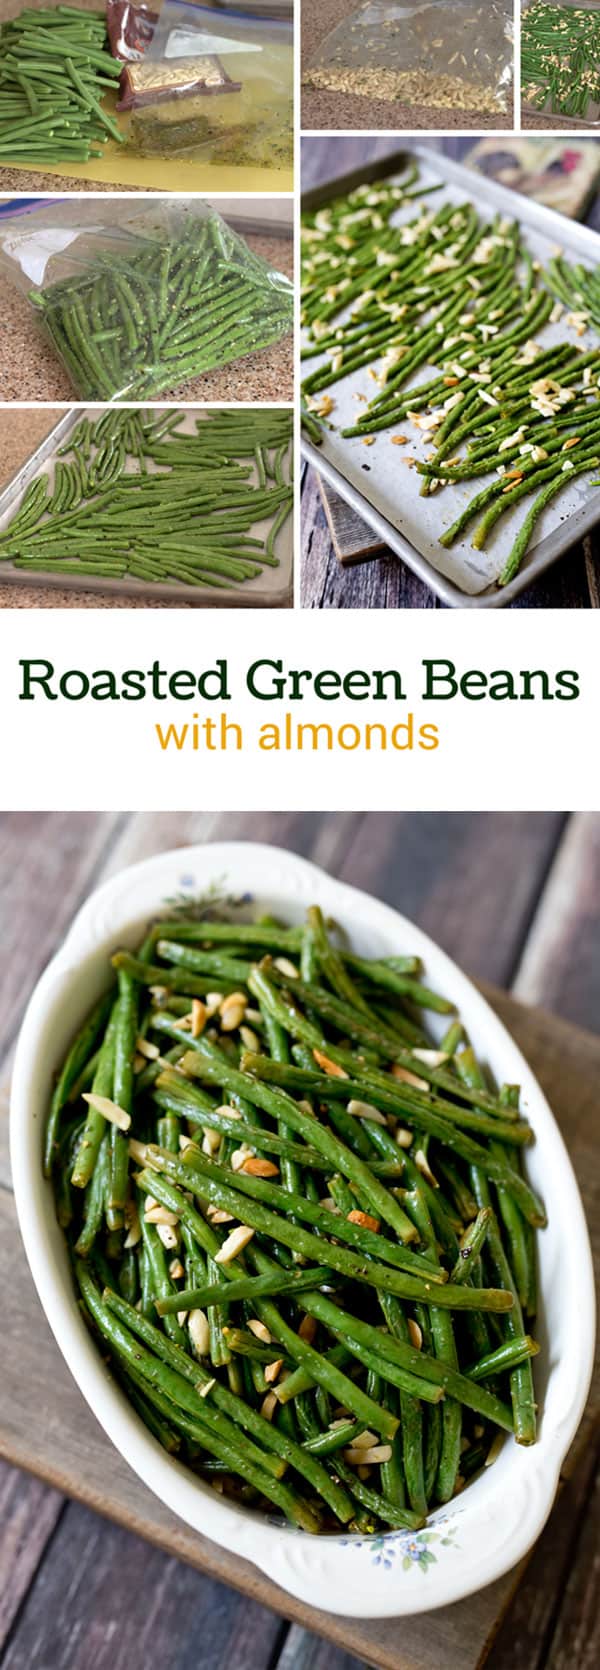 Roasted-Green-Beans-With-Almonds-Collage-2-Barbara-Bakes